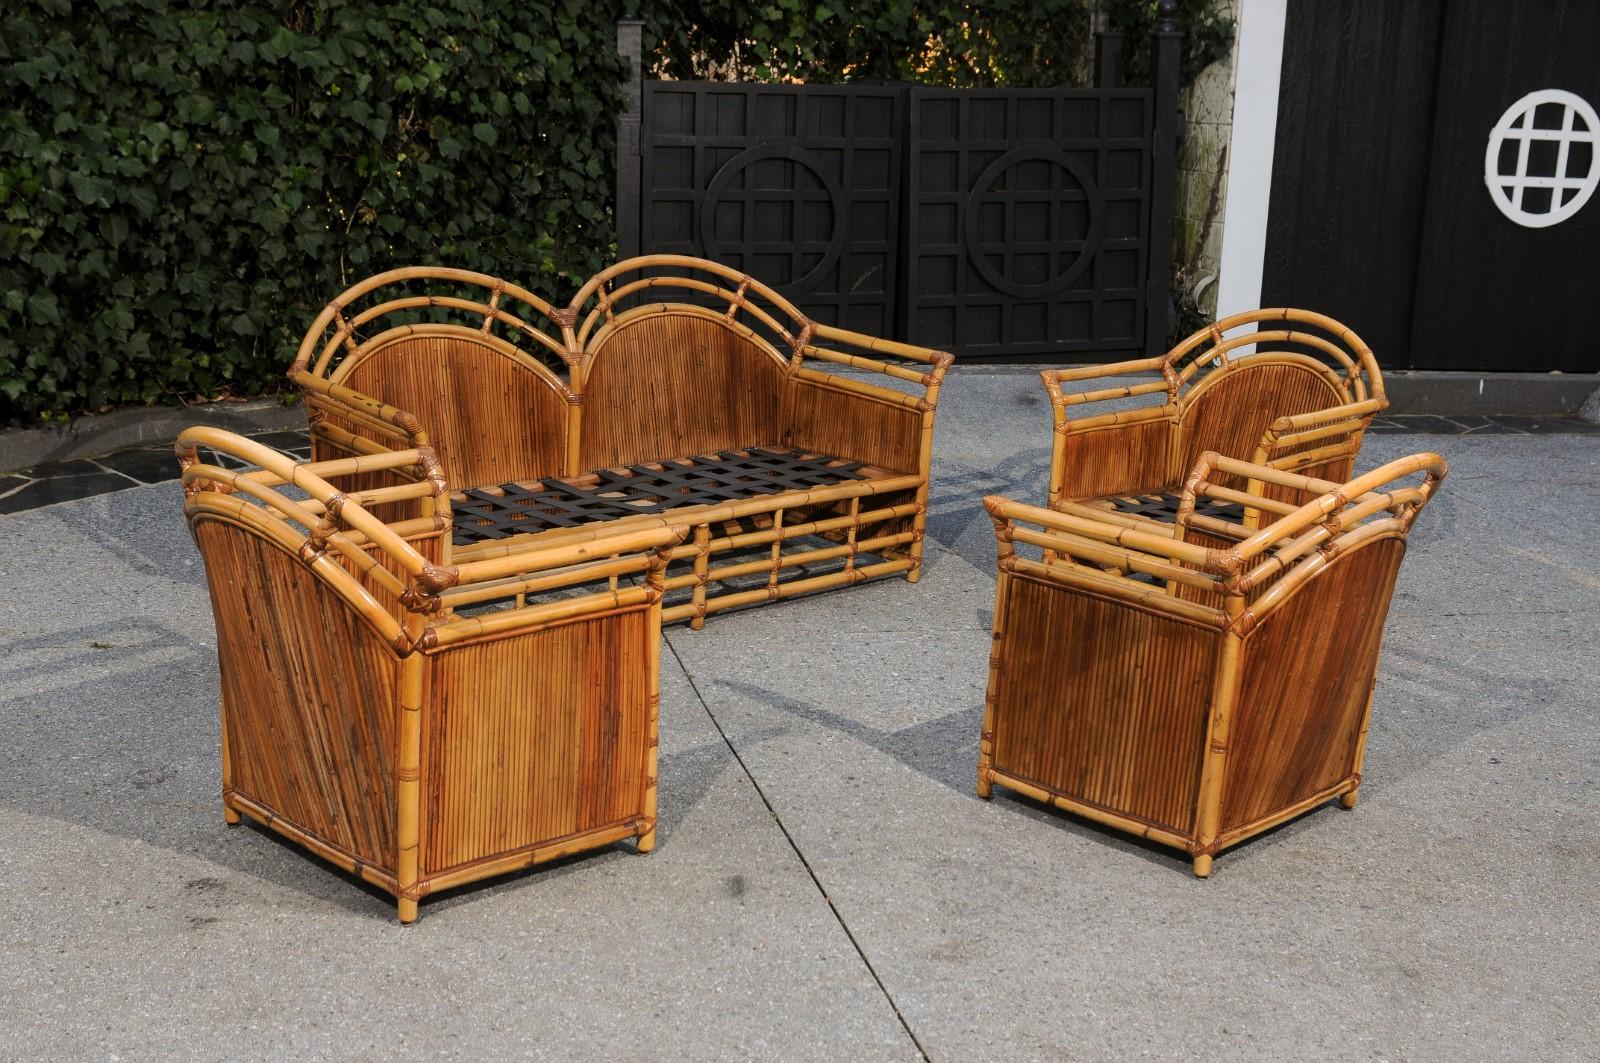 These magnificent frames are shipped as professionally photographed and described in the listing narrative: Meticulously professionally restored and ready for upholstery. This seating set is unique on the market. Expert custom upholstery service